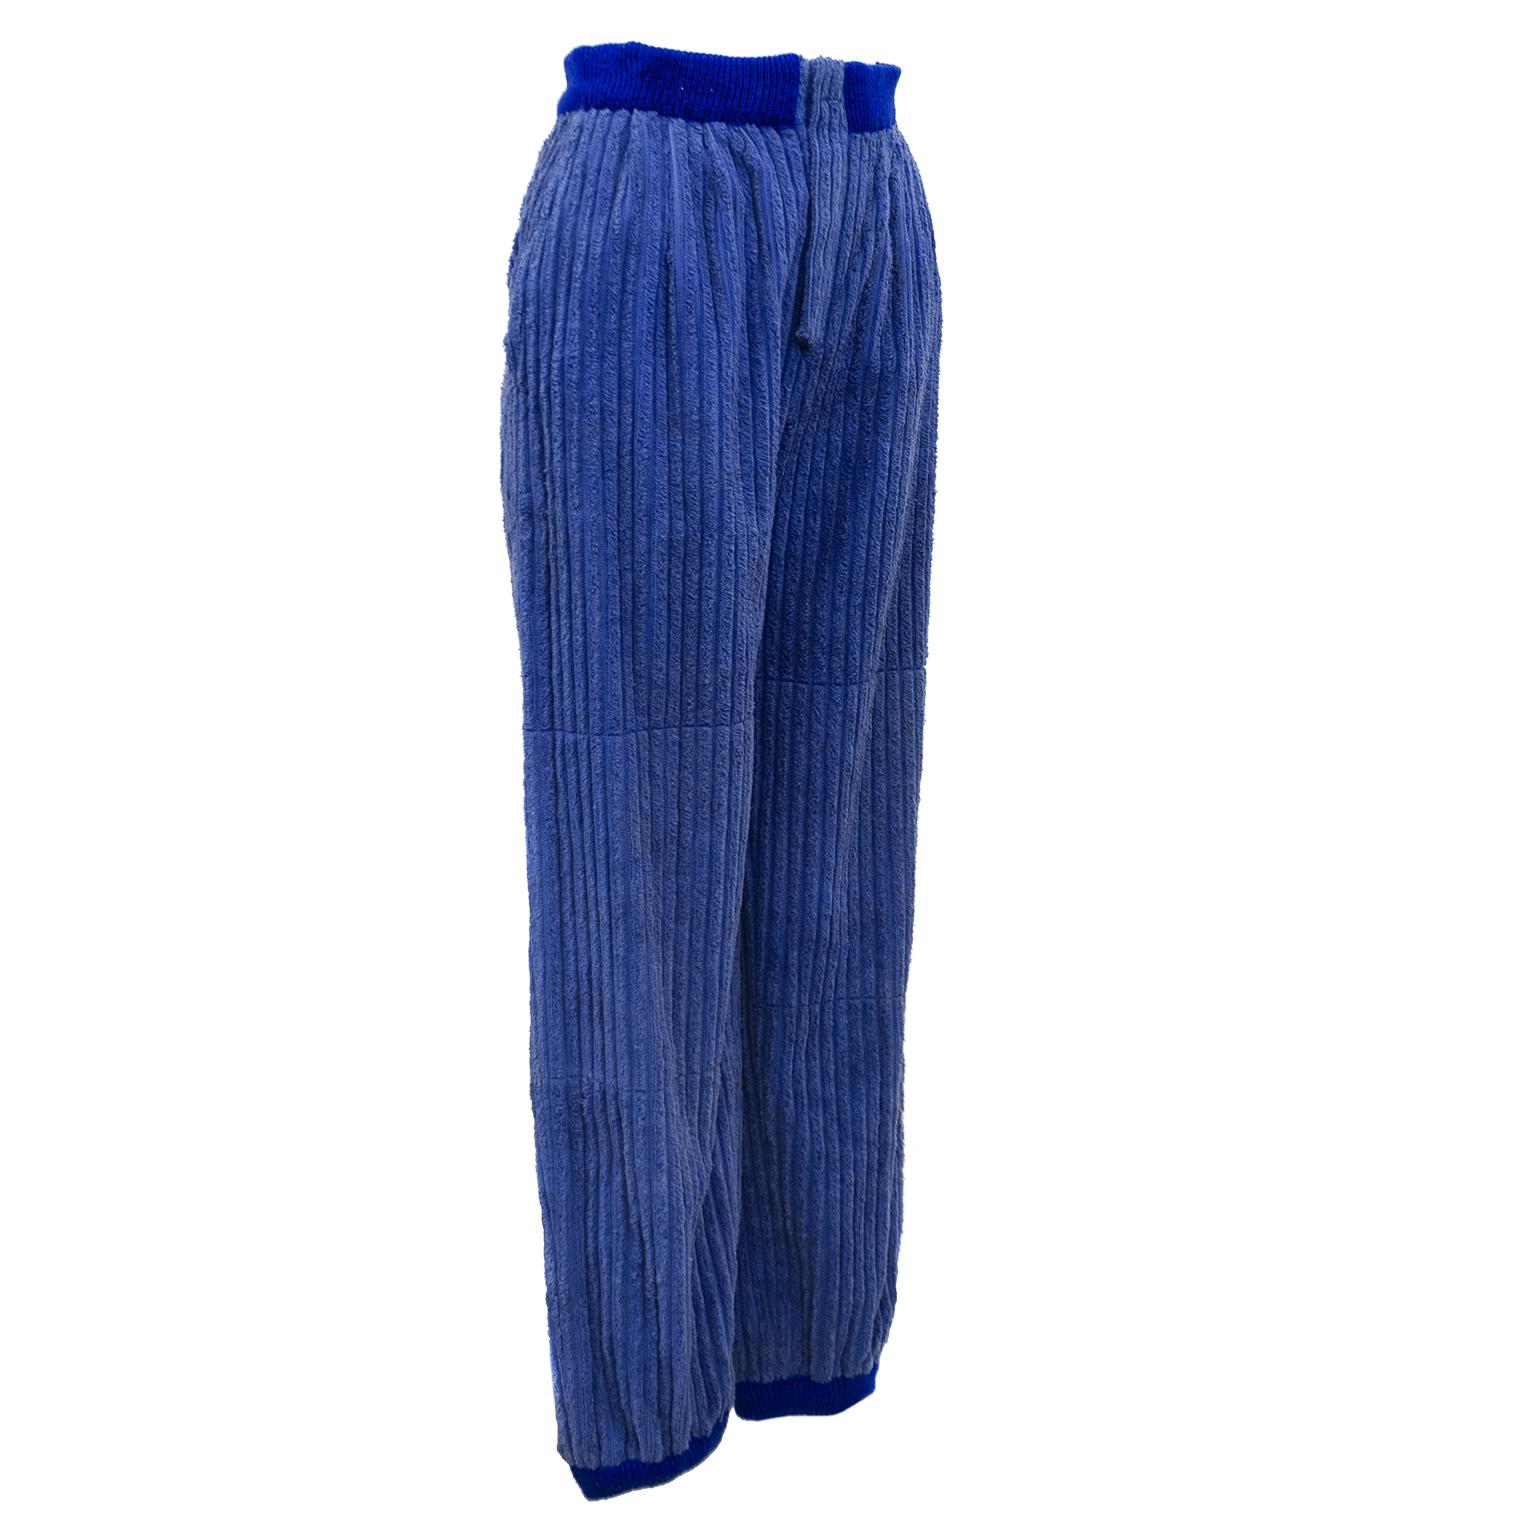 Dorothée Bis 1970's wide whale royal blue corduroy jogging pants with ribbed knit bands at ankles and waist. Front fly and side angled pockets finish the overall relaxed look of these pants. High waist fit. In very good vintage condition, well cared